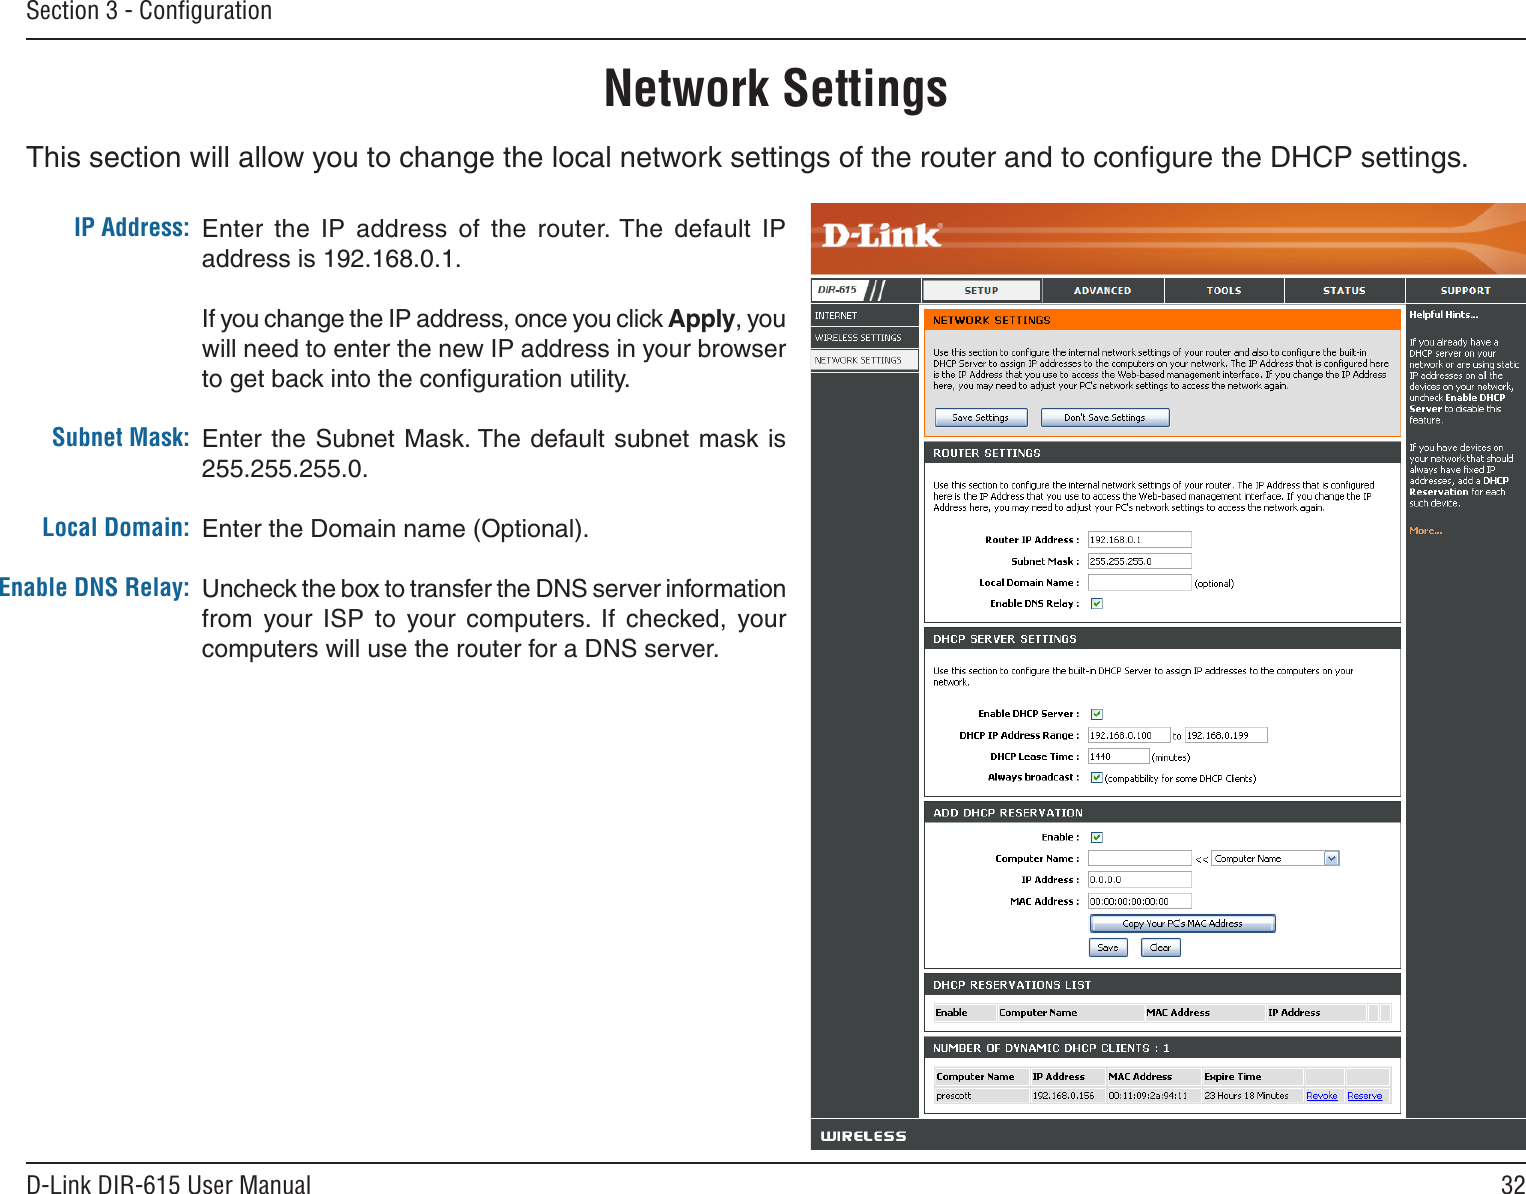 32D-Link DIR-615 User ManualSection 3 - ConﬁgurationThis section will allow you to change the local network settings of the router and to conﬁgure the DHCP settings.Network SettingsEnter  the  IP  address  of  the  router. The  default  IP address is 192.168.0.1.If you change the IP address, once you click Apply, you will need to enter the new IP address in your browser to get back into the conﬁguration utility.Enter the Subnet Mask. The default  subnet mask is 255.255.255.0.Enter the Domain name (Optional).Uncheck the box to transfer the DNS server information from  your  ISP  to  your  computers.  If  checked,  your computers will use the router for a DNS server.IP Address:Subnet Mask:Local Domain:Enable DNS Relay: